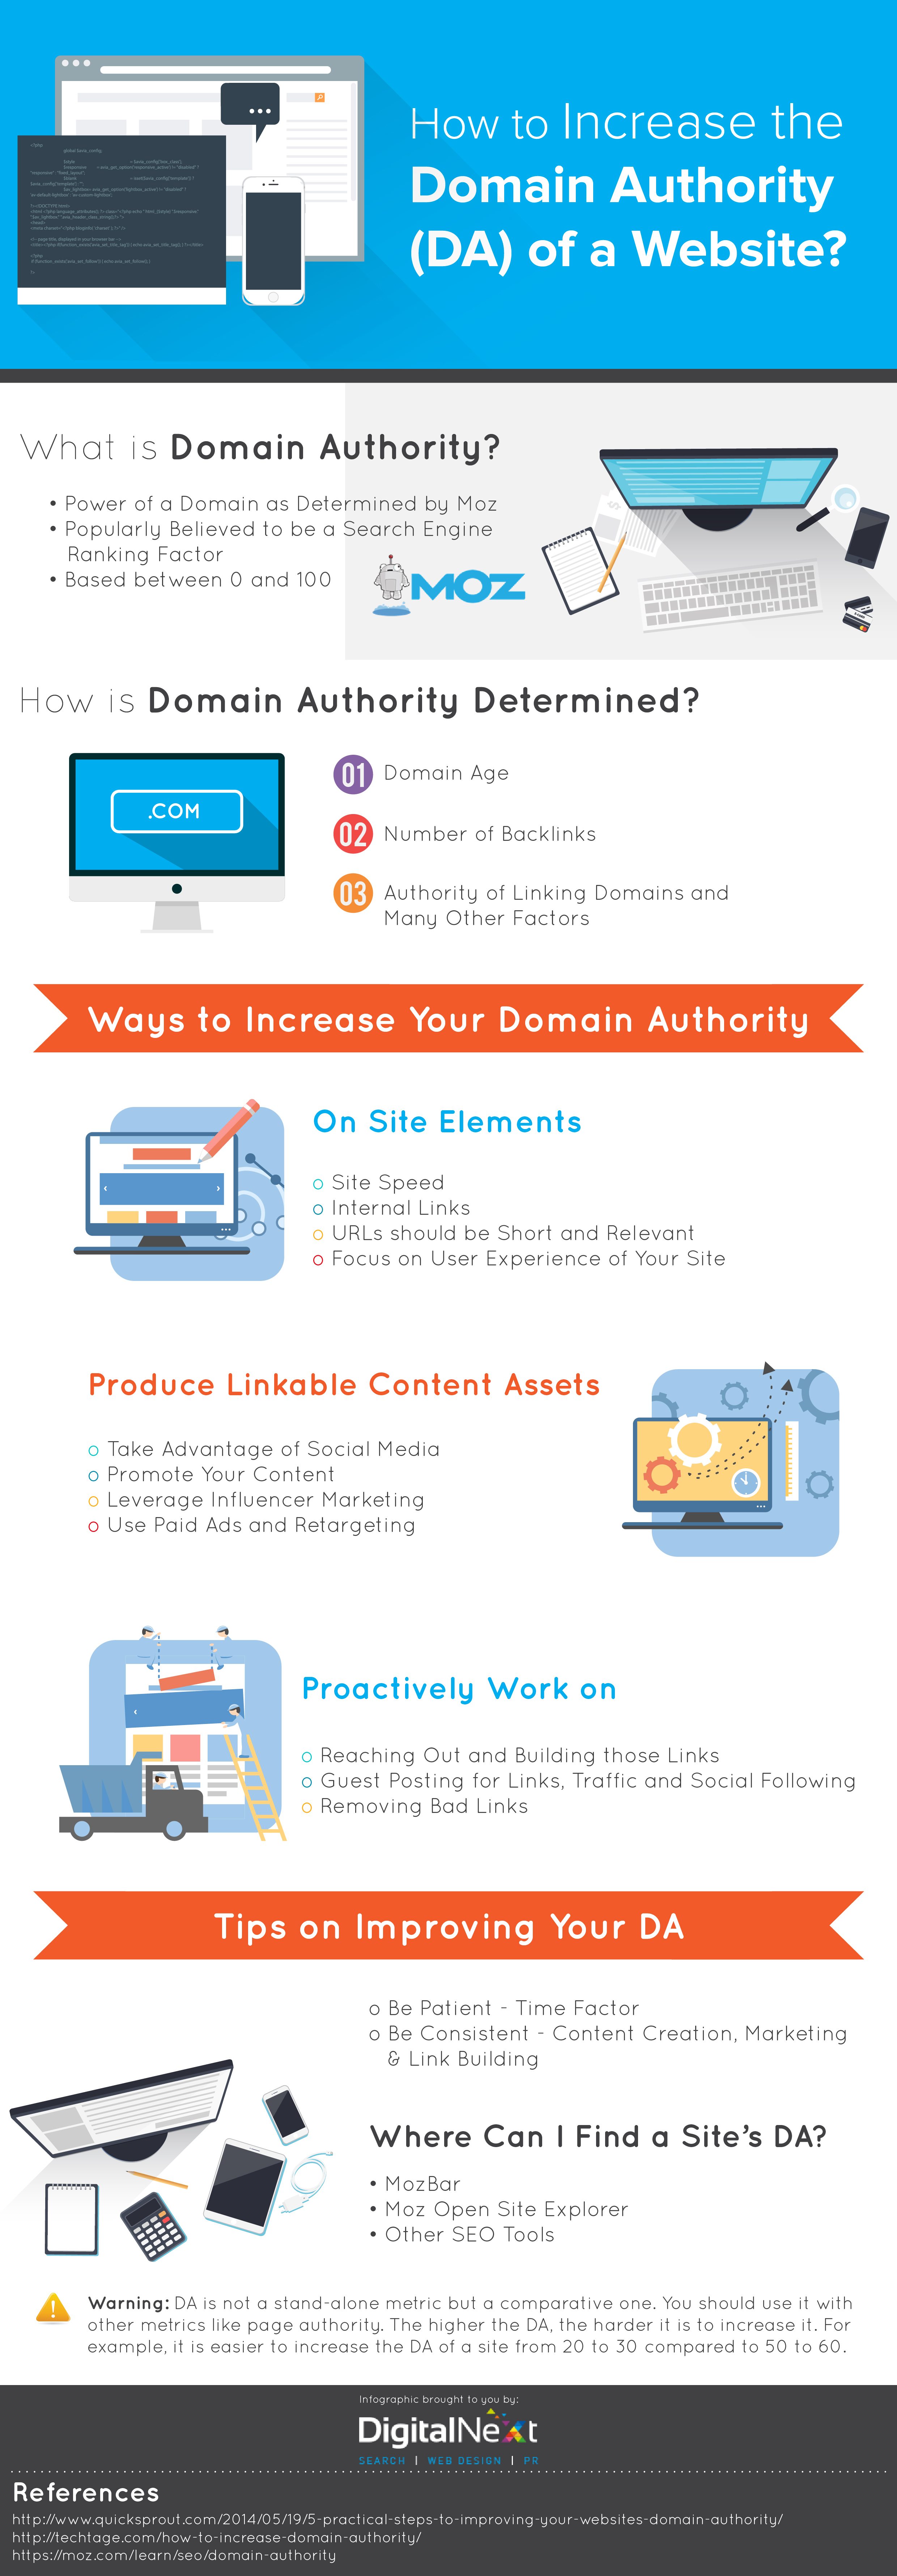 11-Practical-Ways-to-Increase-Domain-Authority-DA-of-a-Website-Infographic